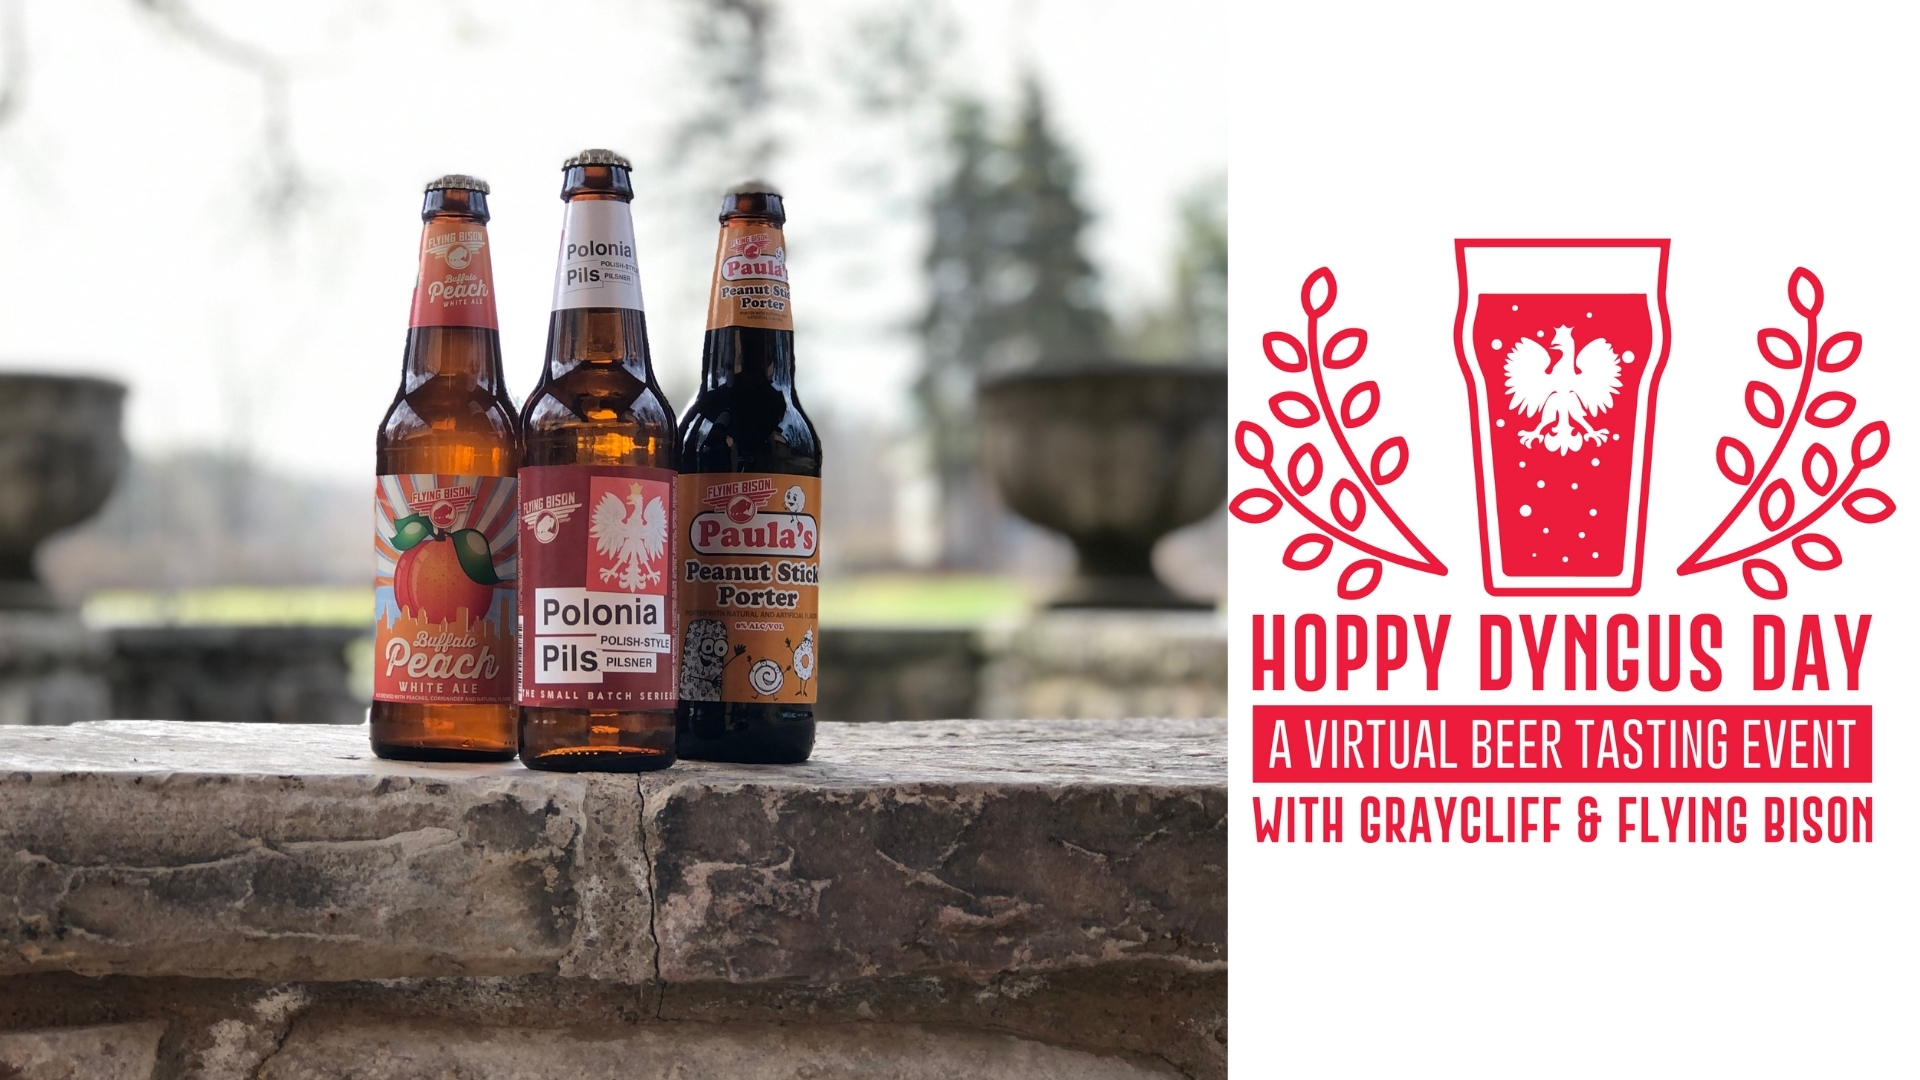 Hoppy Dyngus Day: A Virtual Beer Tasting Event With Graycliff and Flying Bison, Buffalo, New York, United States